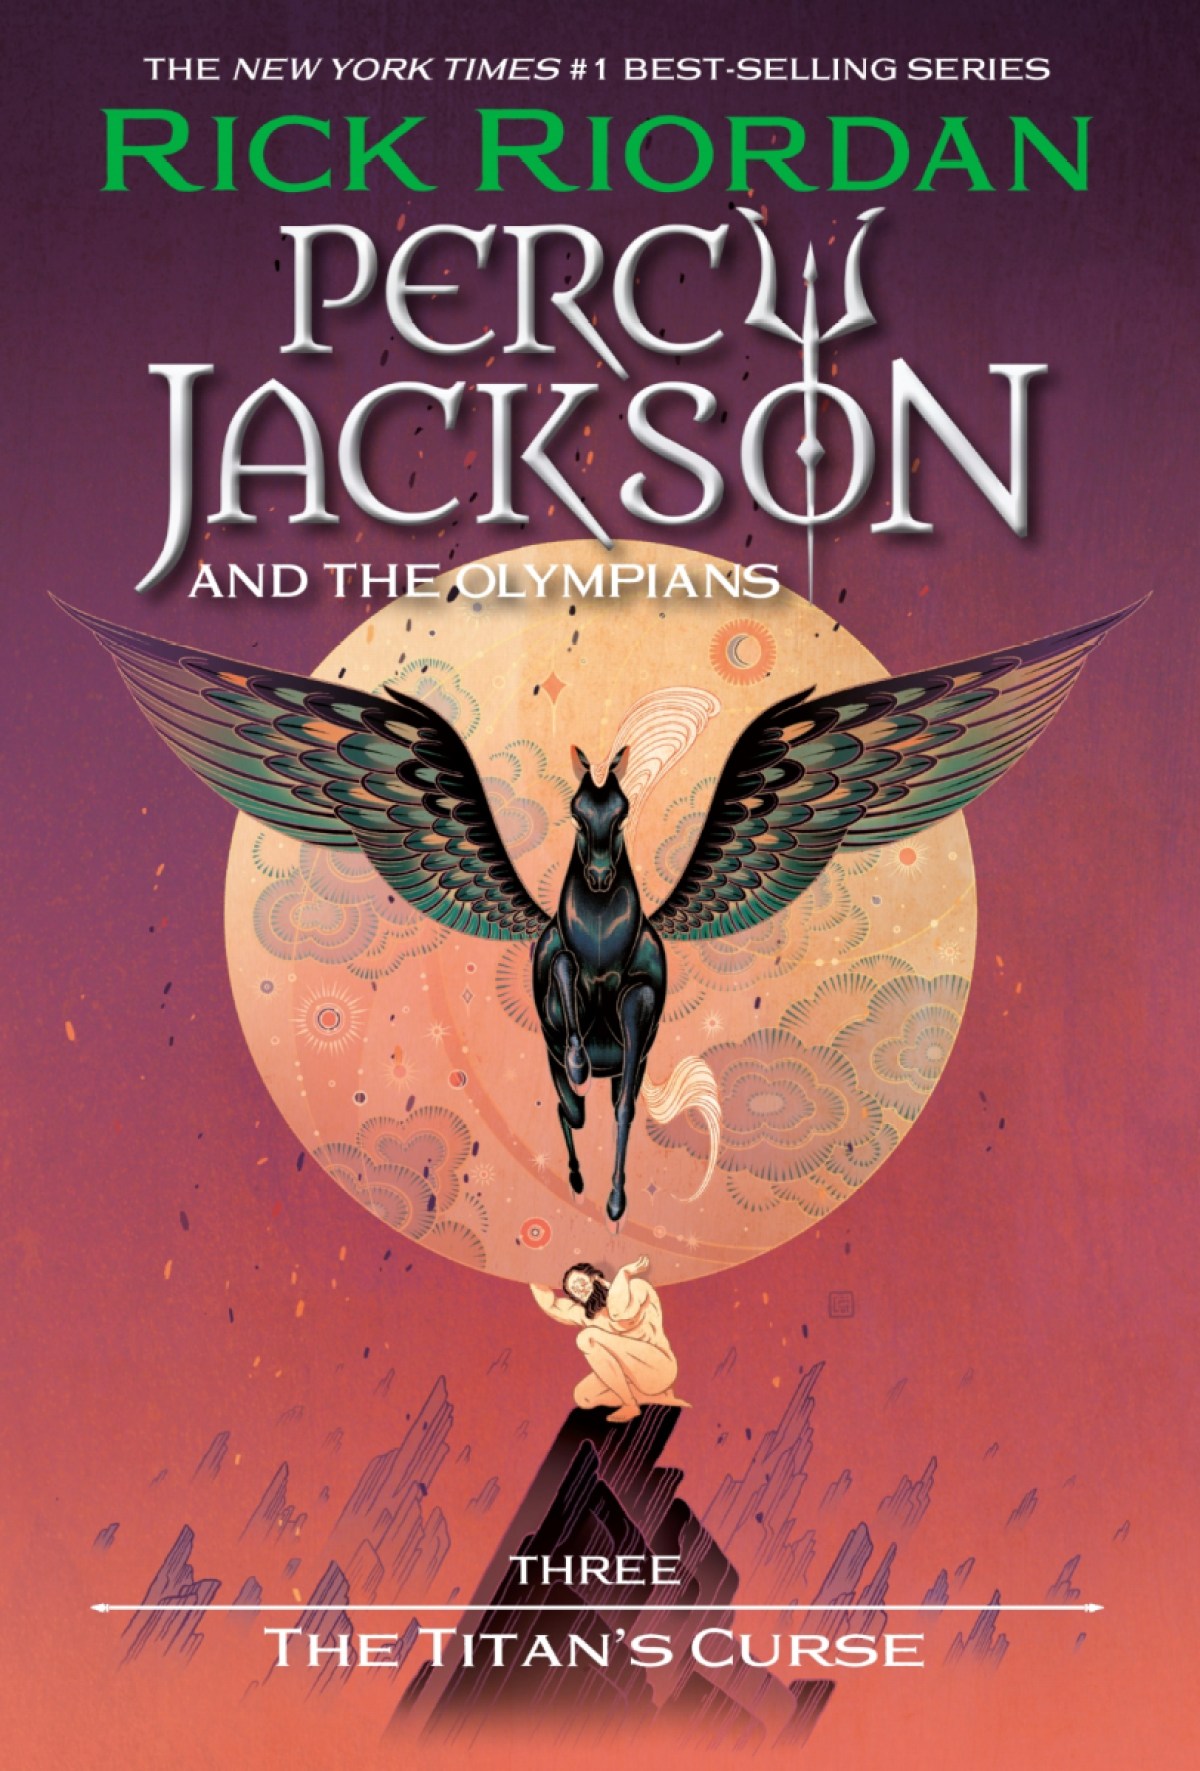 Percy Jackson and the Olympians Book 3 - The Titan's Curse cover art (Disney Hyperion)